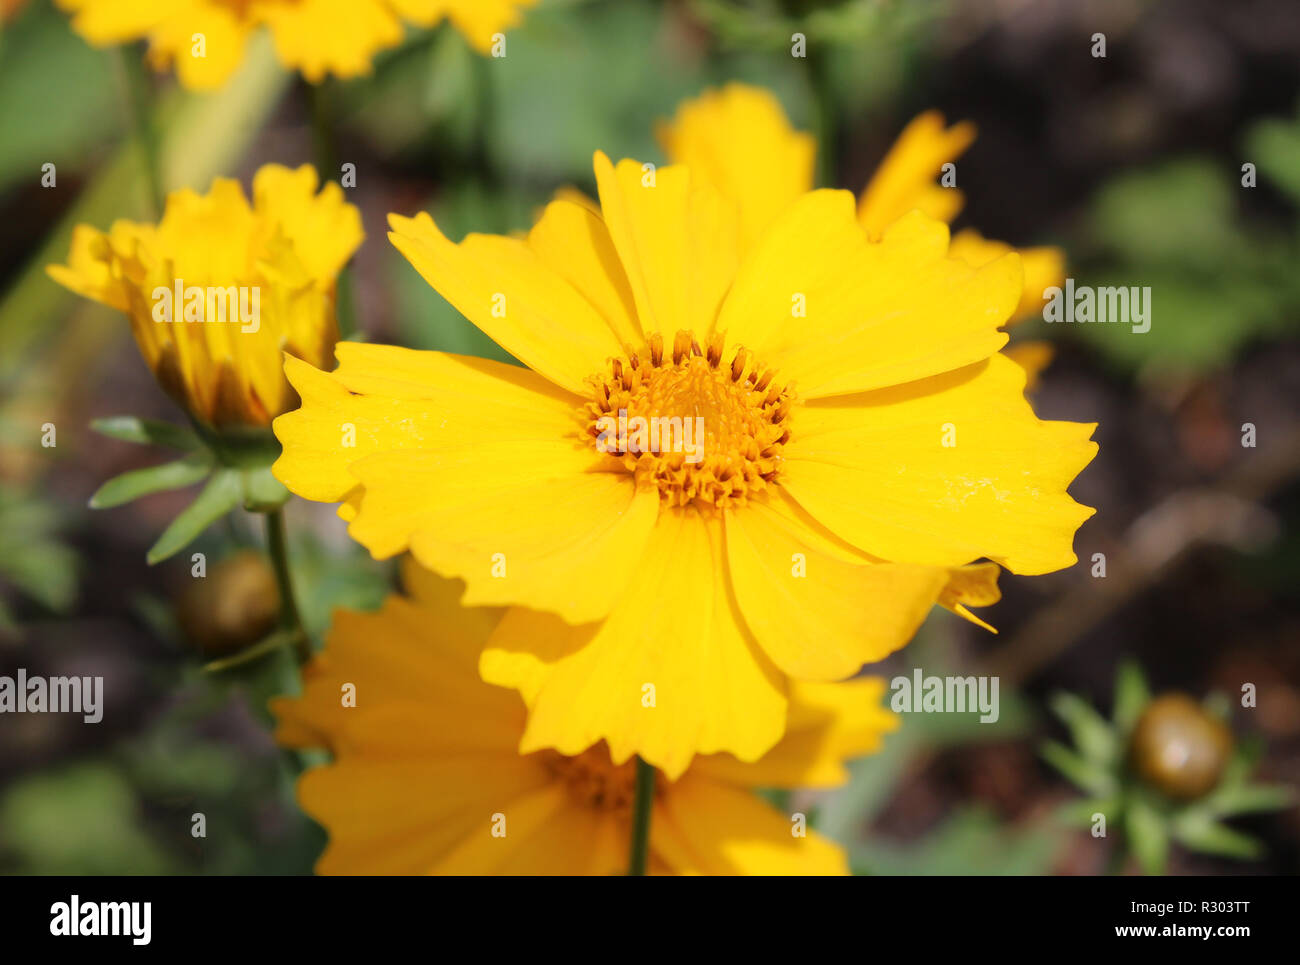 The bright vibrant yellow flower of a Coreopsis plant also known as Tickseed. Stock Photo